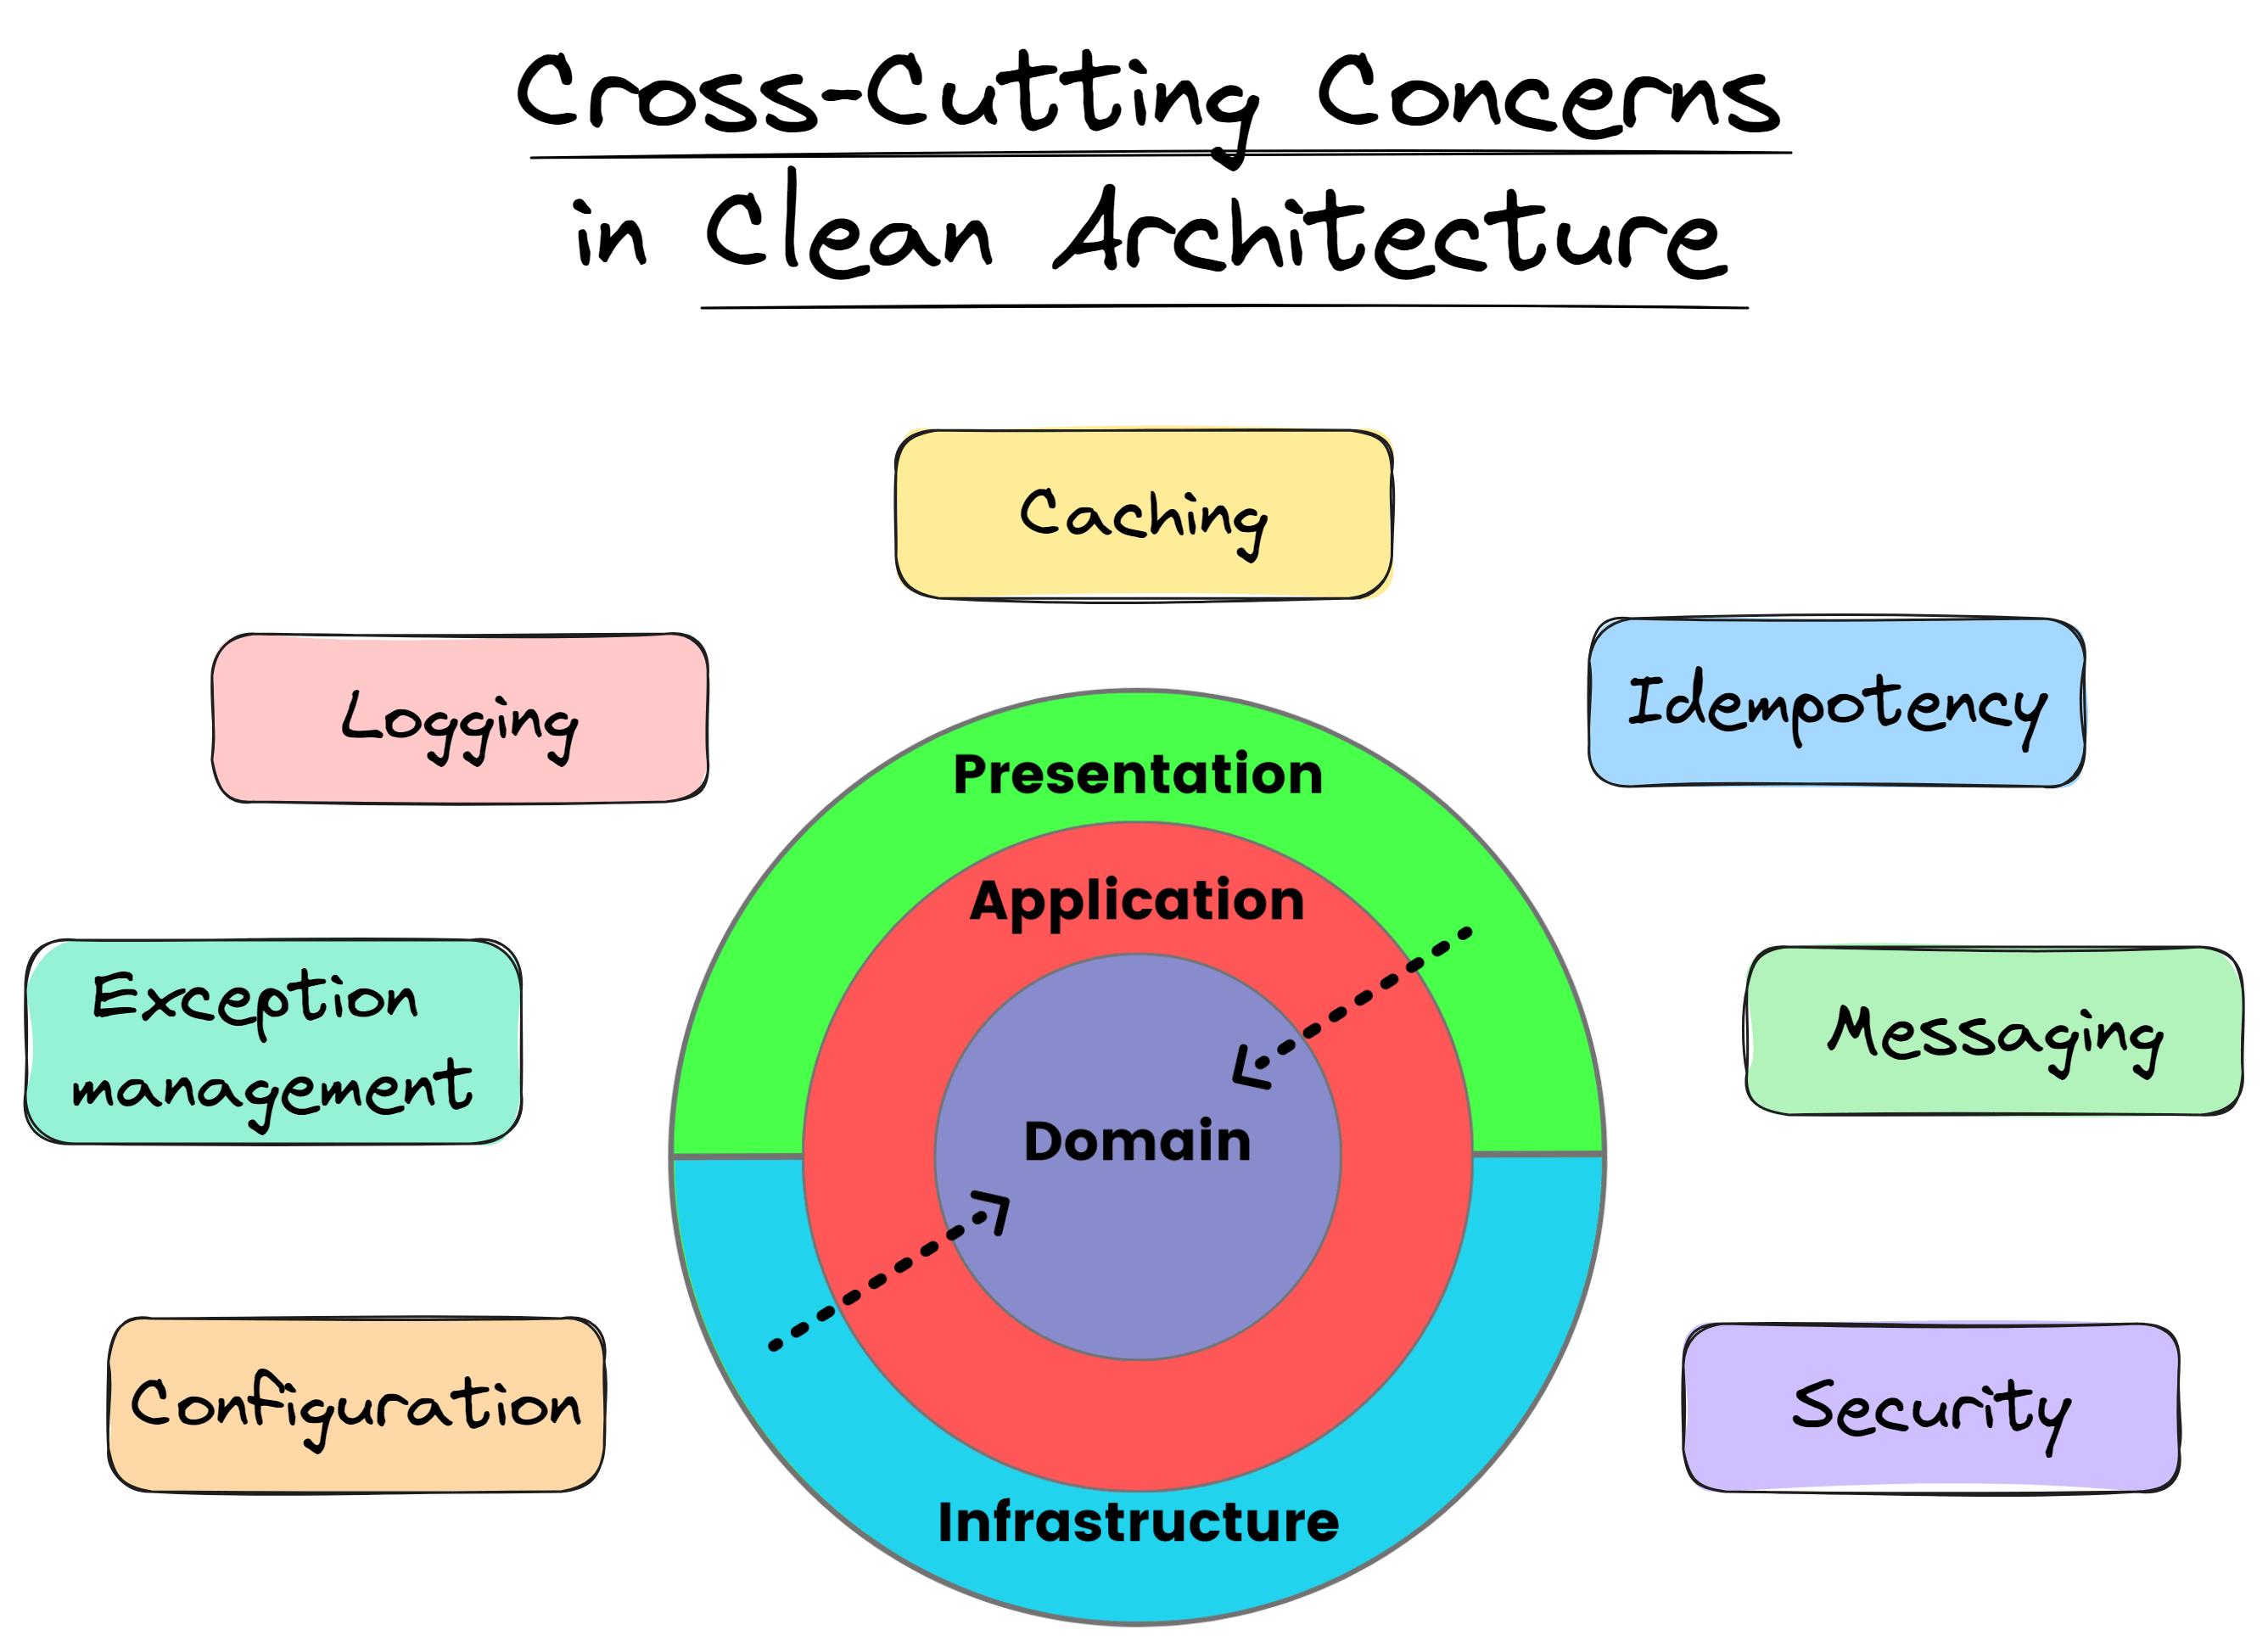 Cross-cutting concerns in Clean Architecture